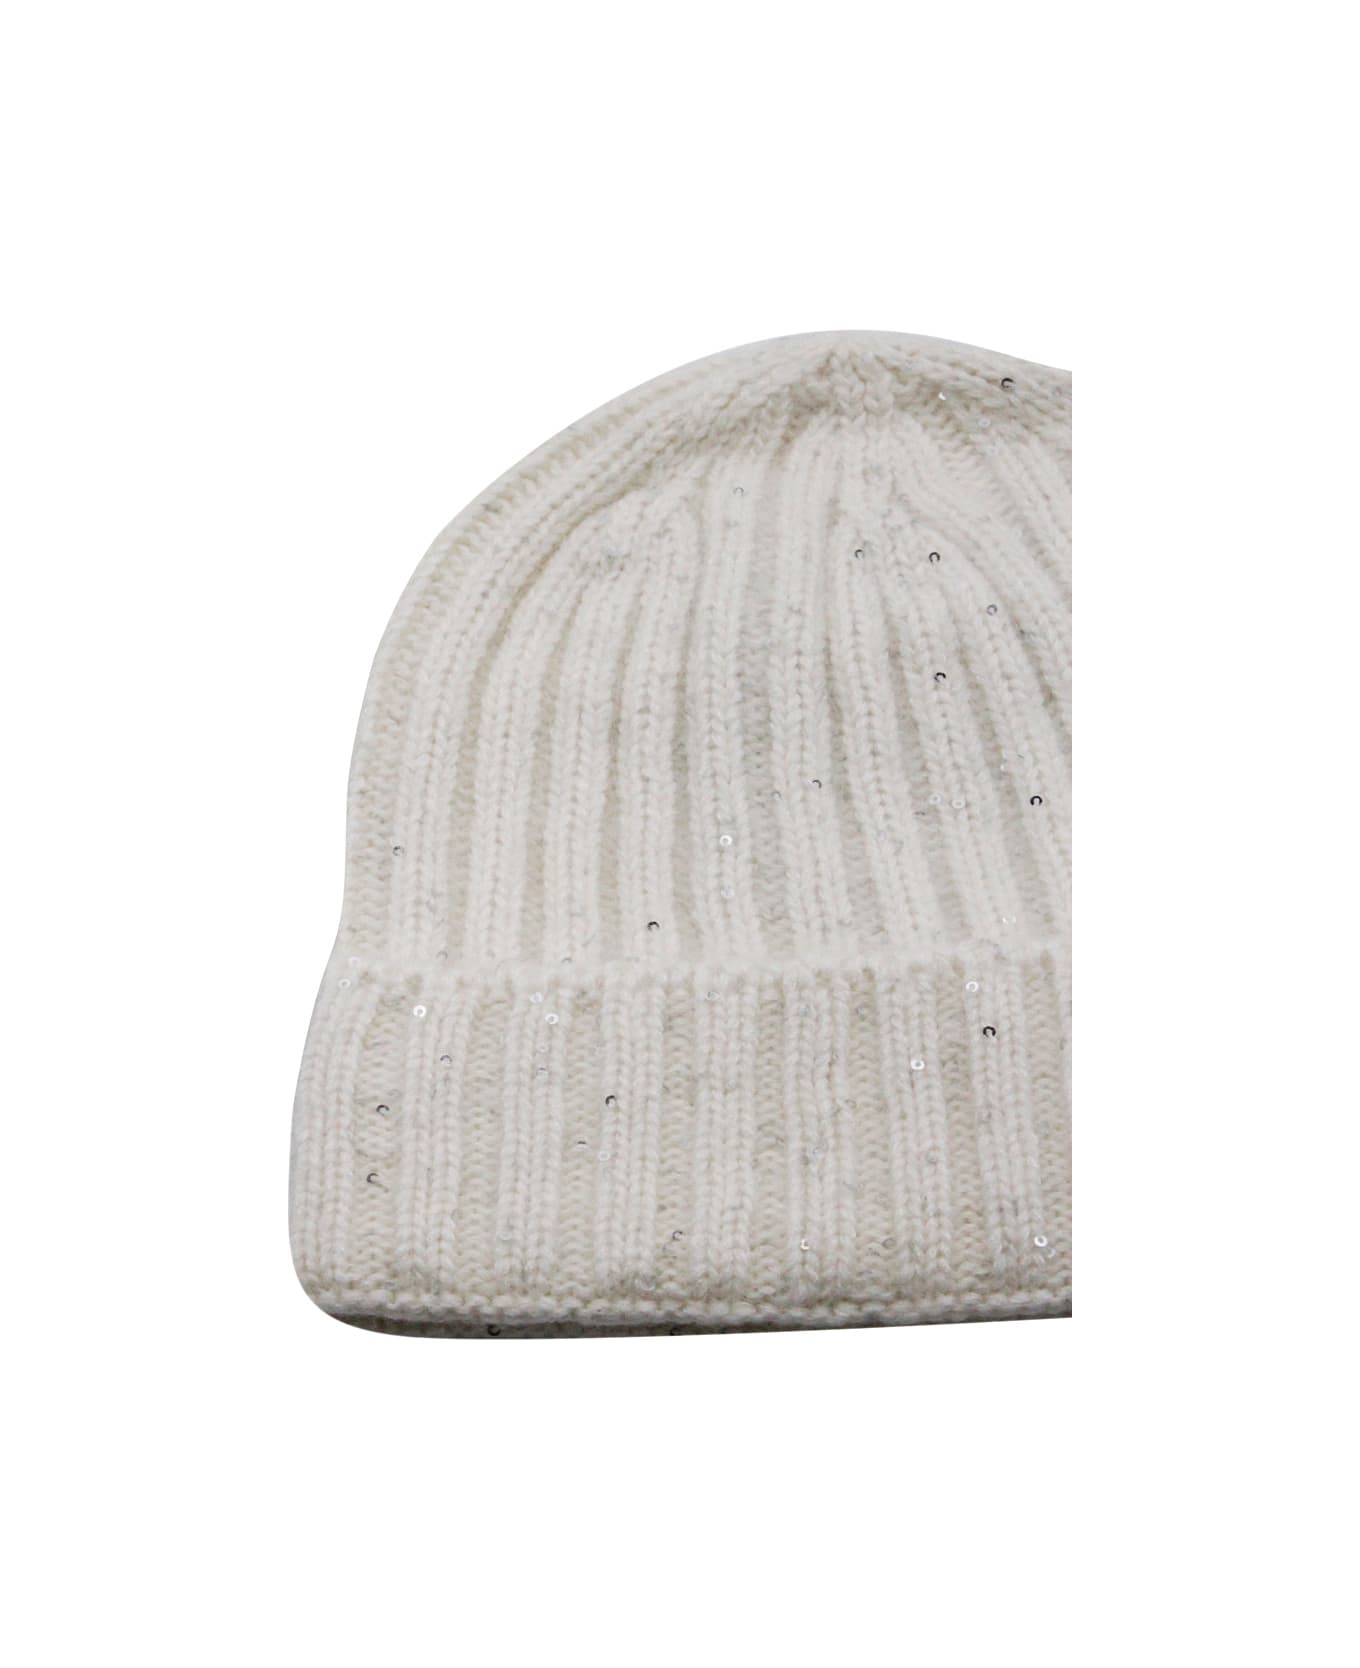 Fabiana Filippi Cap In Soft Wool, Silk And Cashmere Embellished With Micro Sequins - White